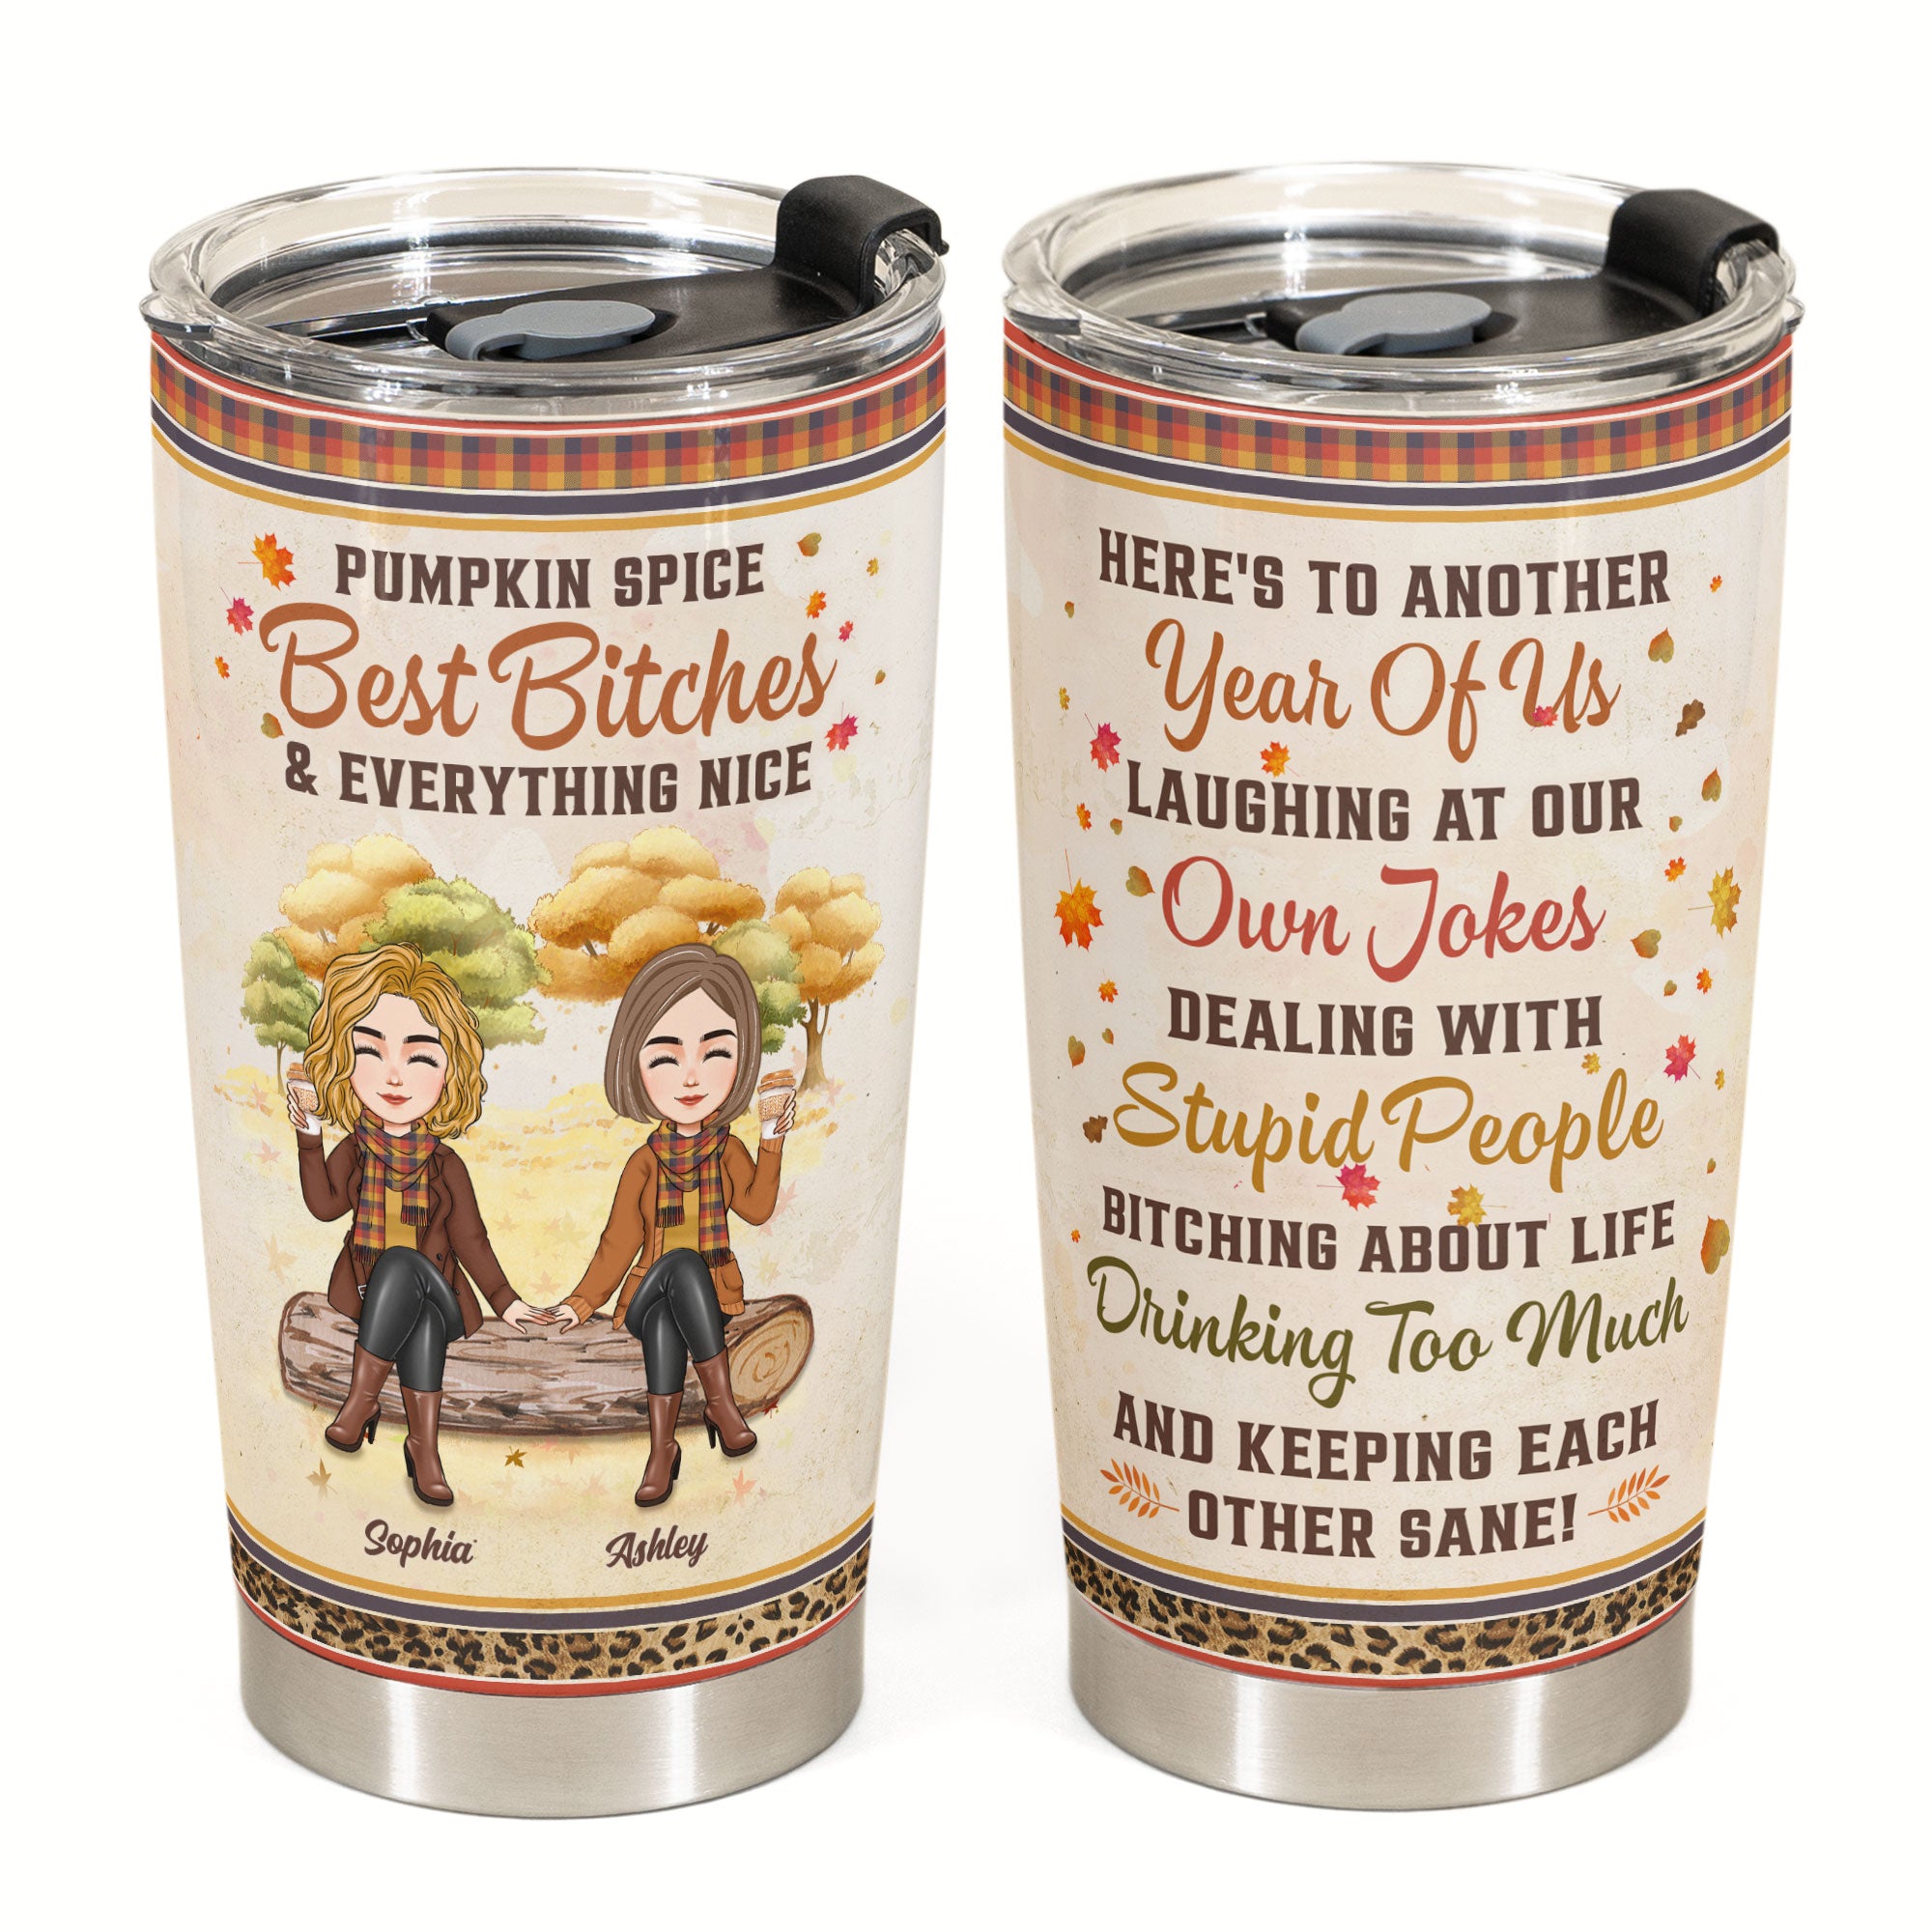 Pumpkin Spice Best Bitches & Everything Nice - Personalized Tumbler Cup - Funny, Birthday Gift For Friends, Best Friends, Besties, Girl Gang